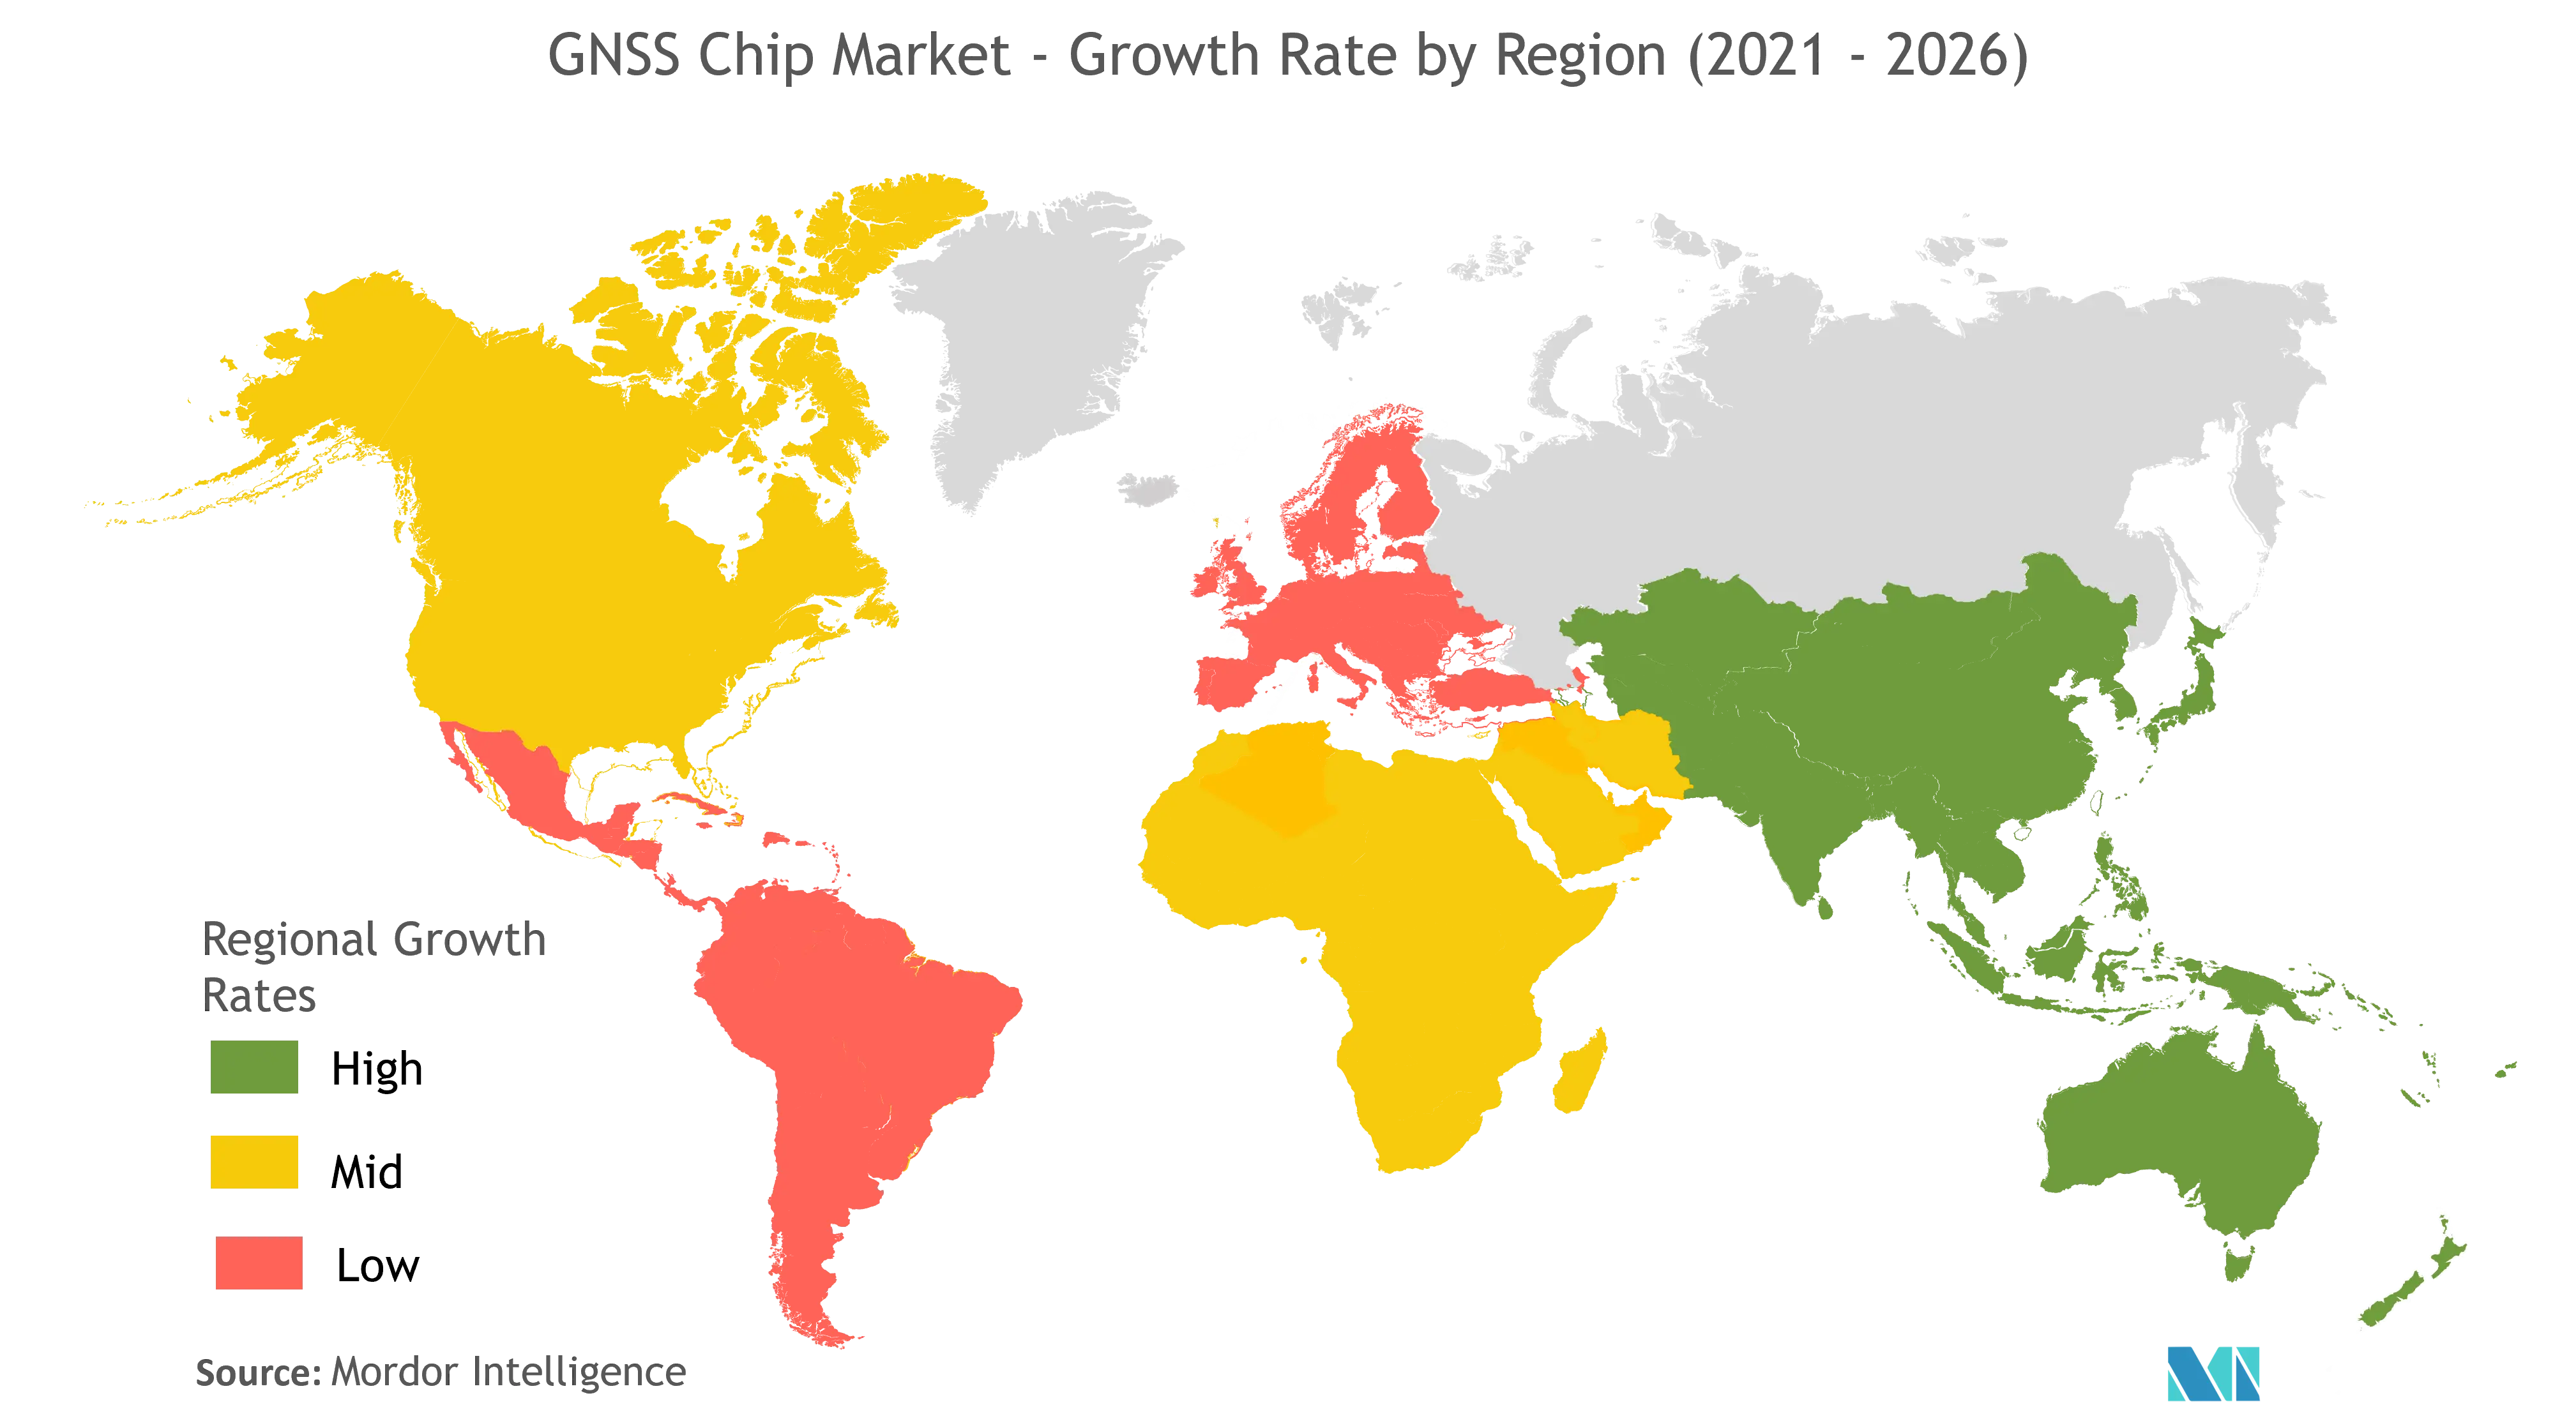 GNSS Chip Market : Growth Rate by Region (2021-2026)